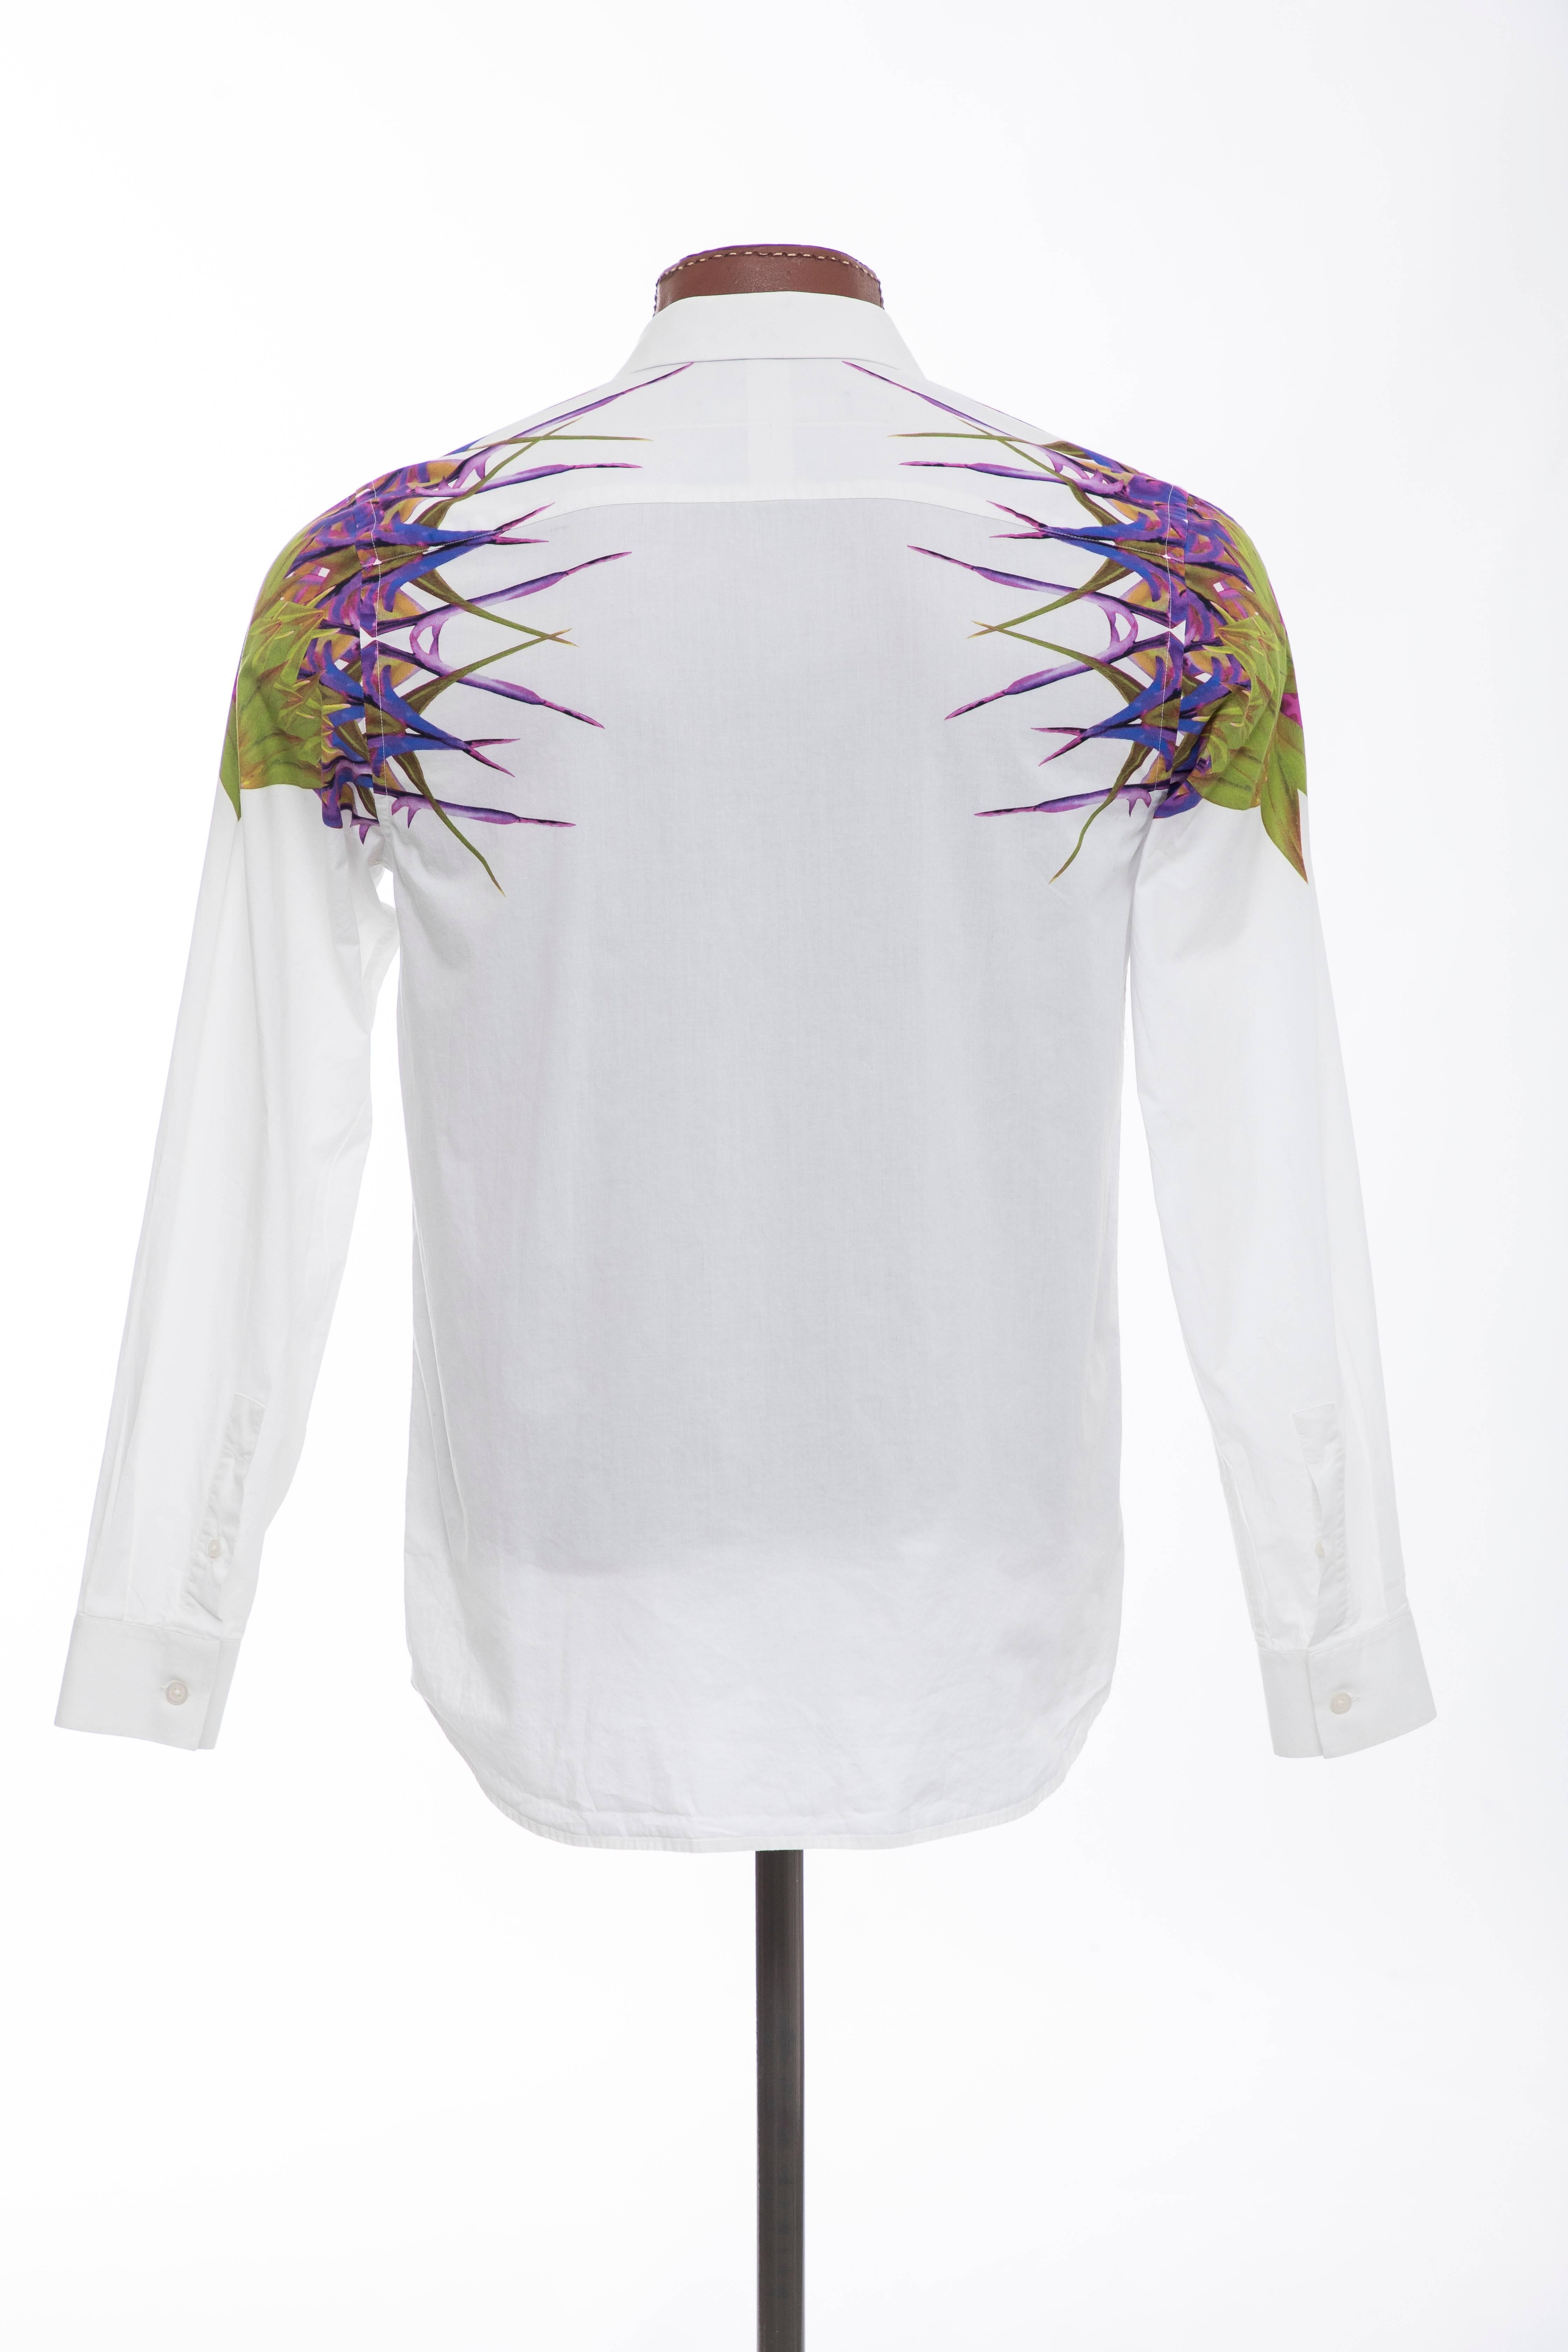 Riccardo Tisci for Givenchy, Spring-Summer 2012 men's white cotton button front shirt with birds of paradise print at shoulders, point collar, single button barrel cuffs and signature T-dart at back. Includes additional buttons.

Size: